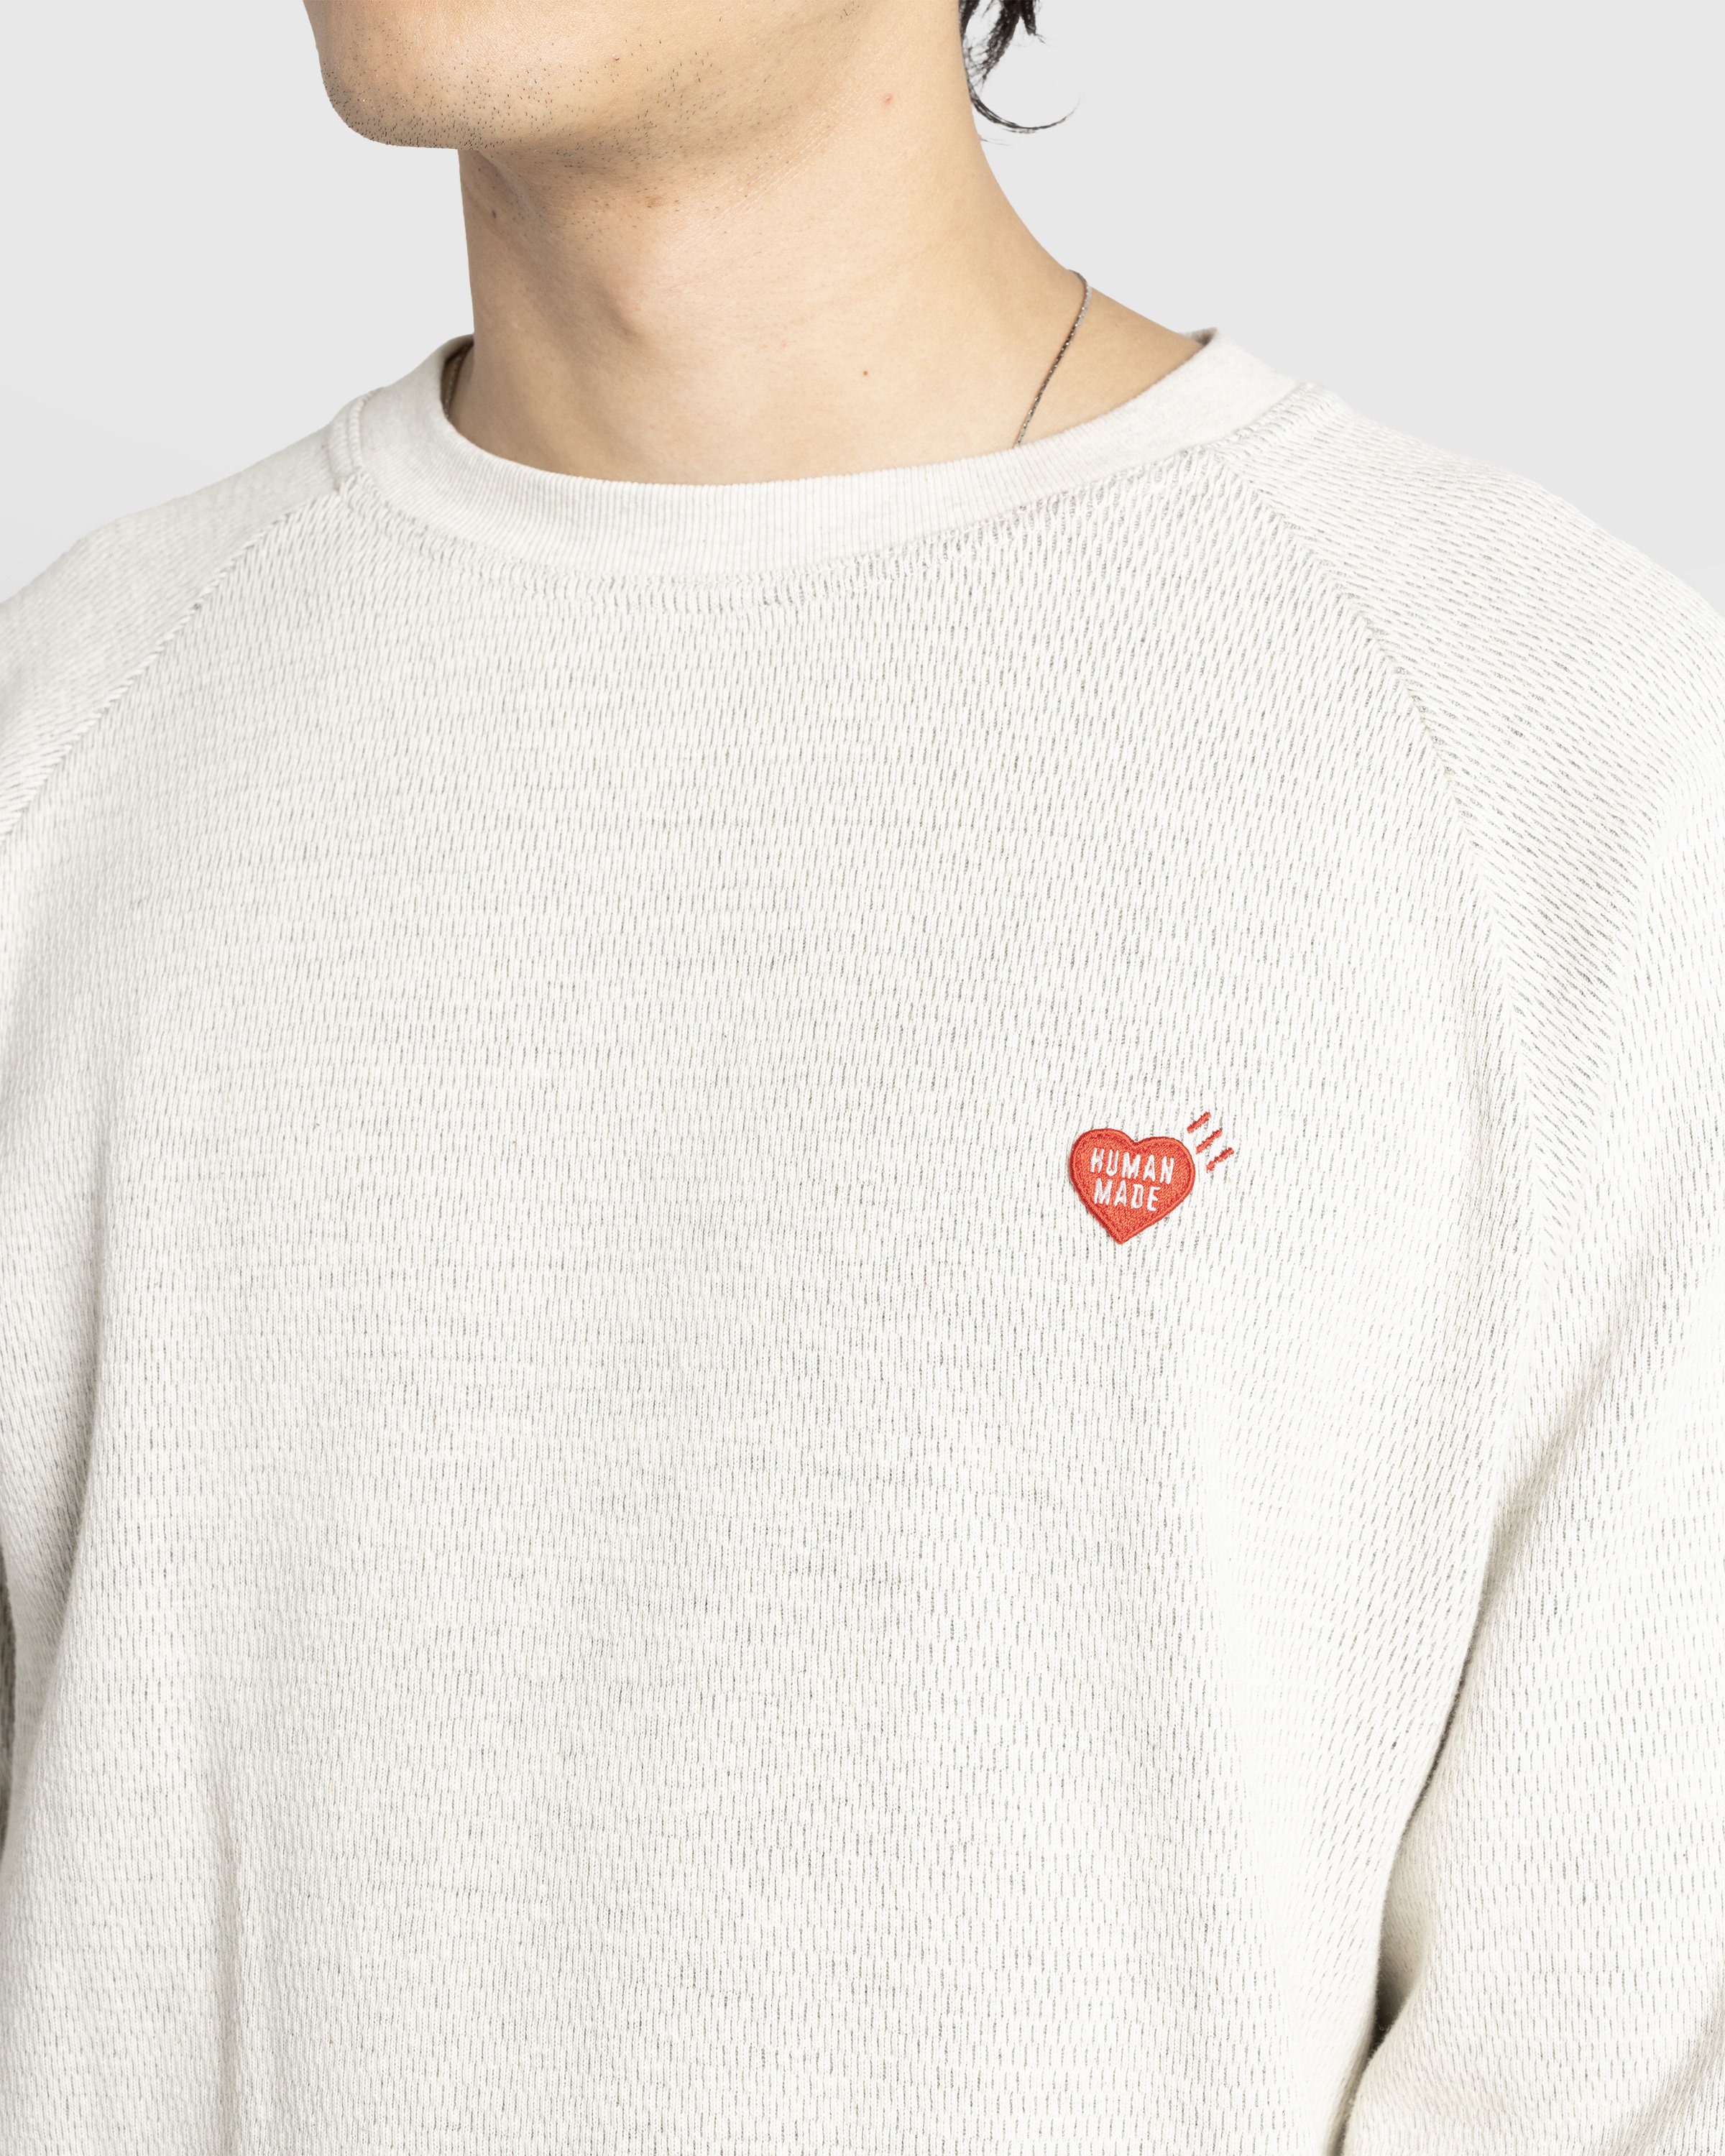 Human Made - THERMAL L/S T-SHIRT White - Clothing - White - Image 5